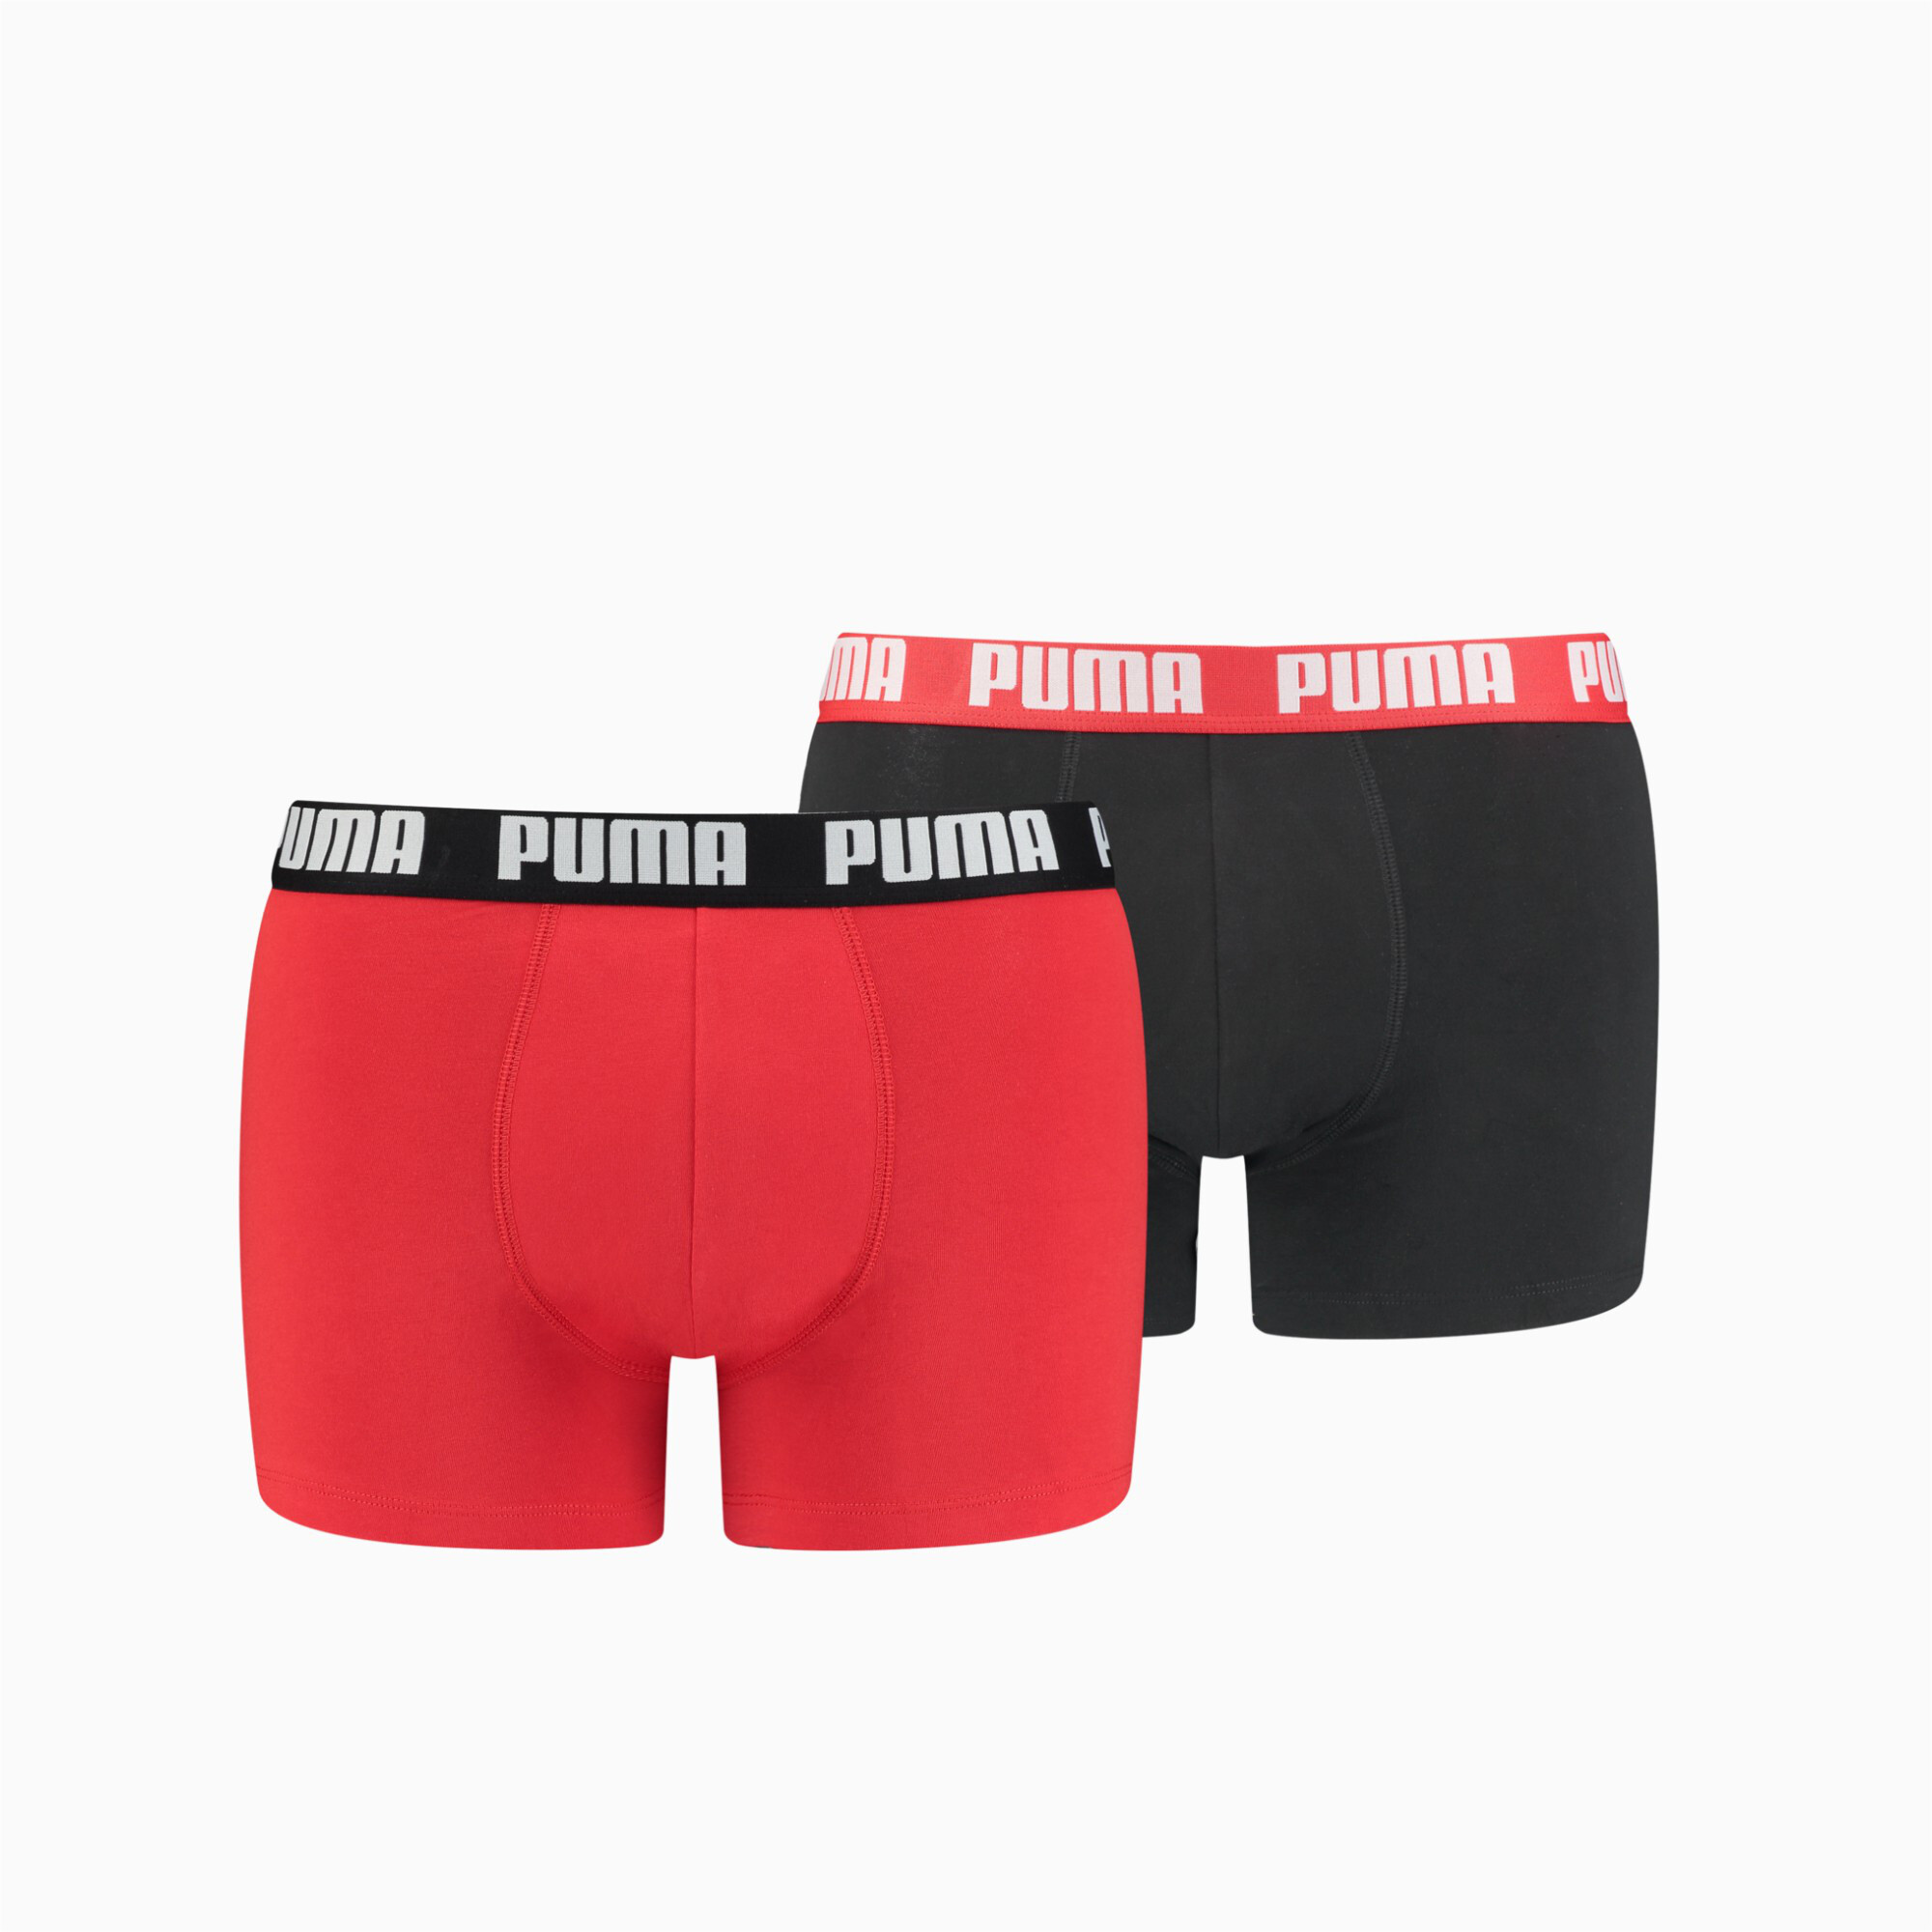 Men's PUMA Basic Boxers 2 Pack In Red, Size Large